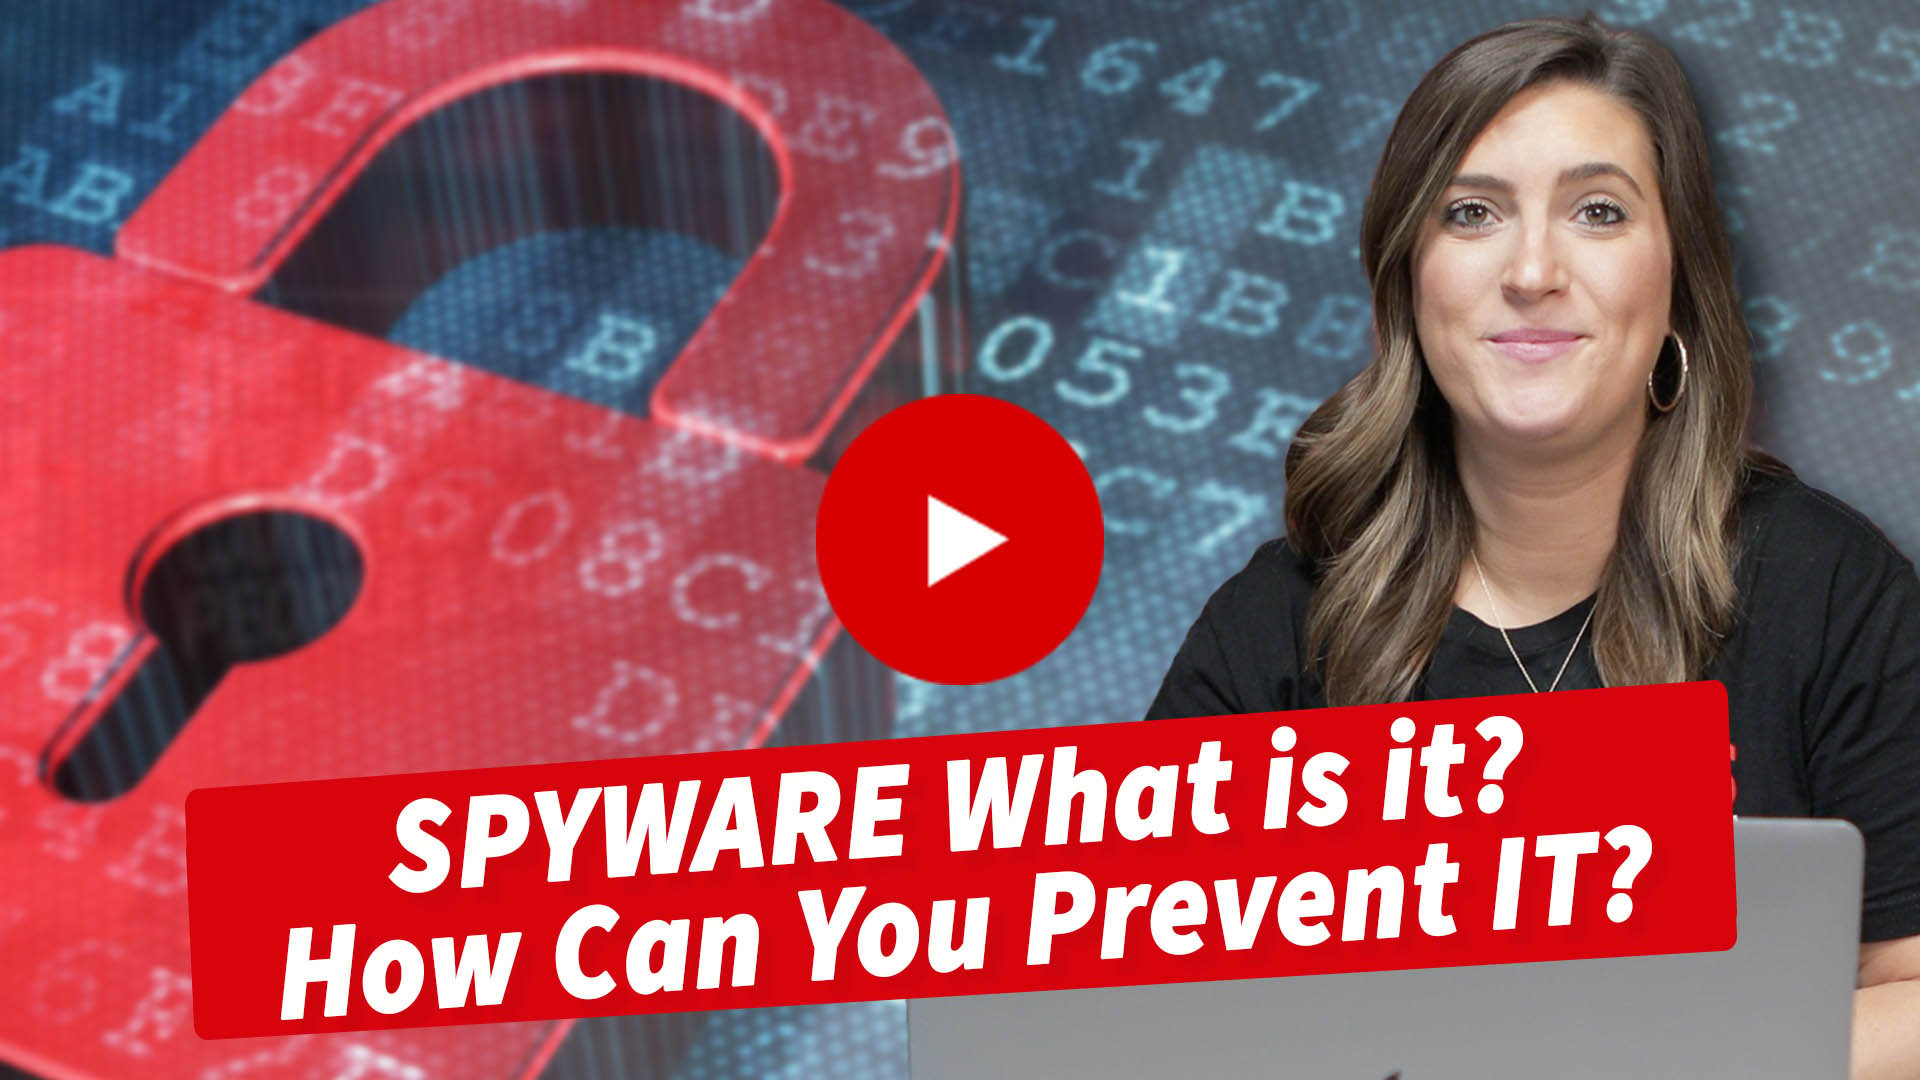 Spyware! What It? How Can You Prevent It!